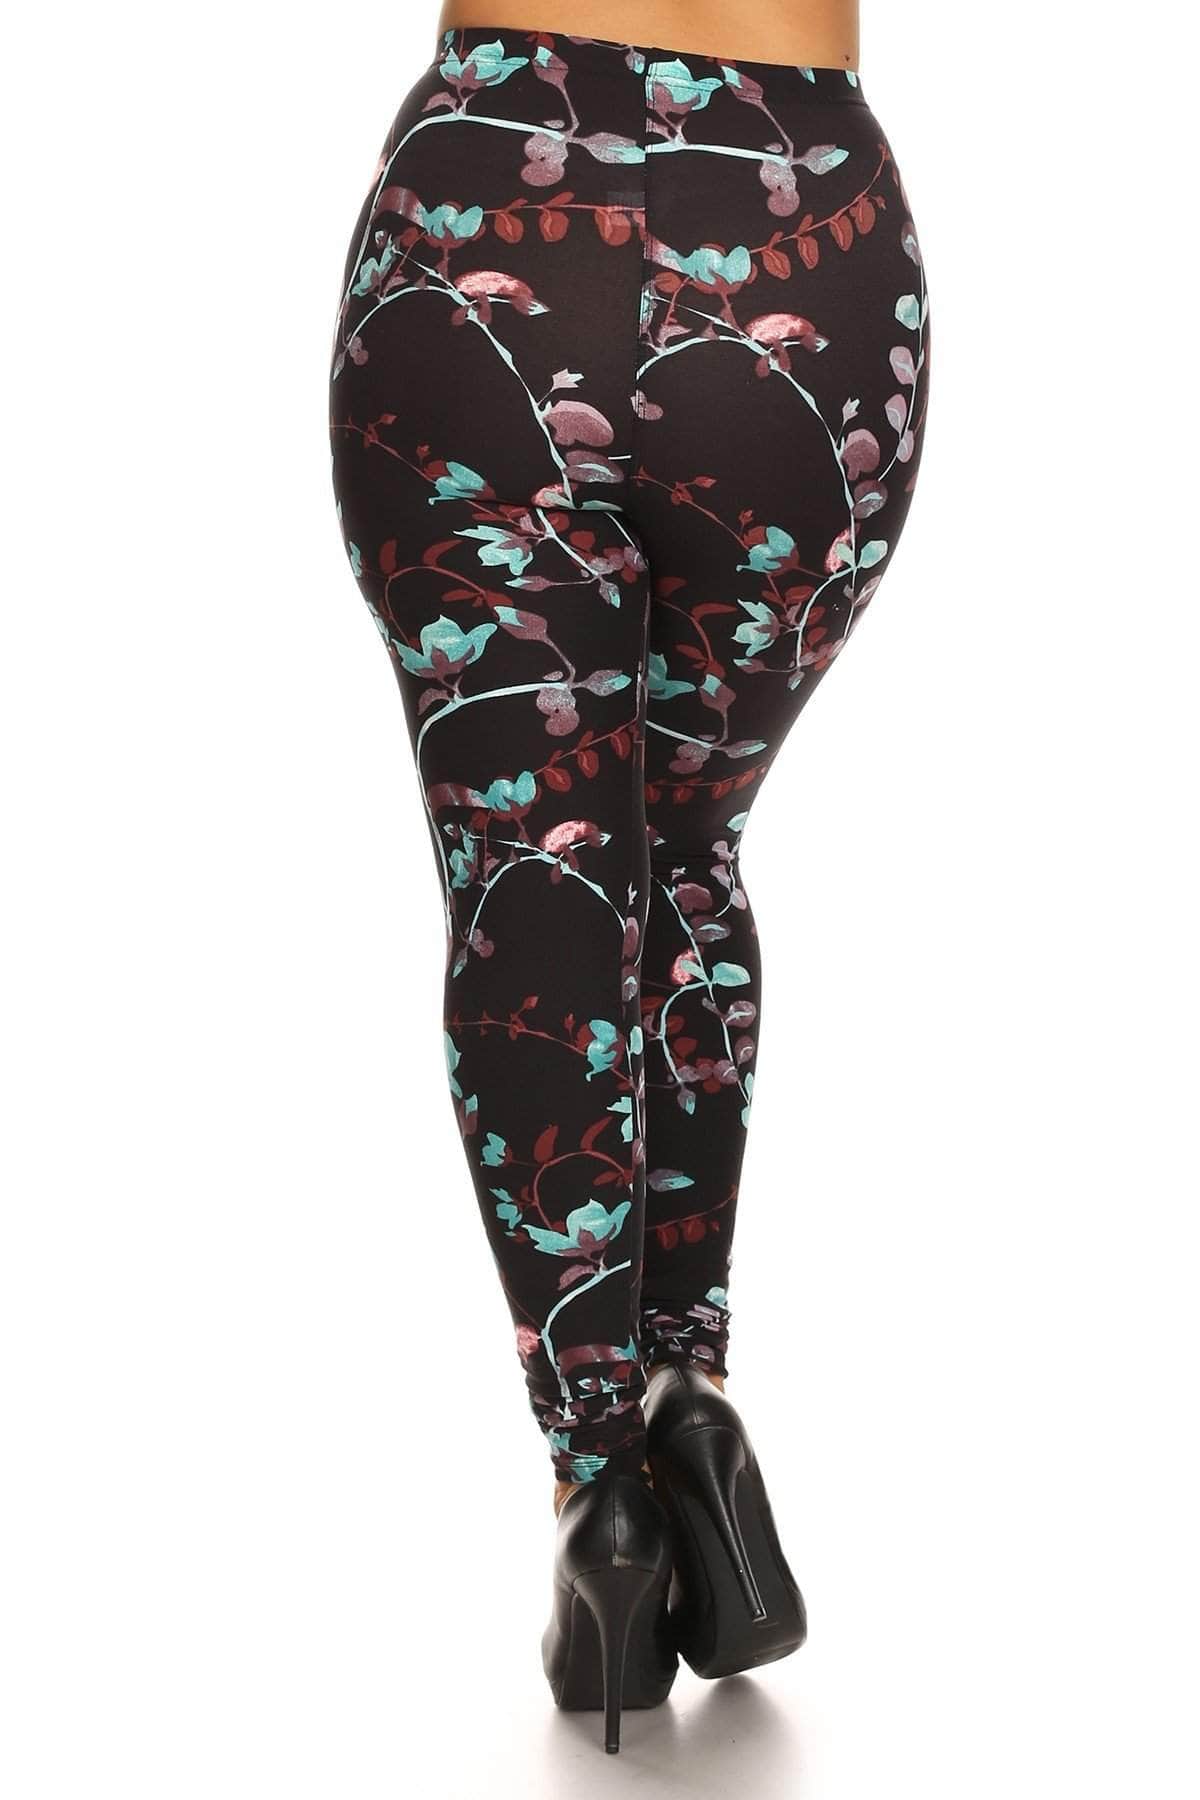 Plus Size Abstract Print, Full Length Leggings In A Slim Fitting Style With A Banded High Waist-[Adult]-[Female]-Multi-Blue Zone Planet